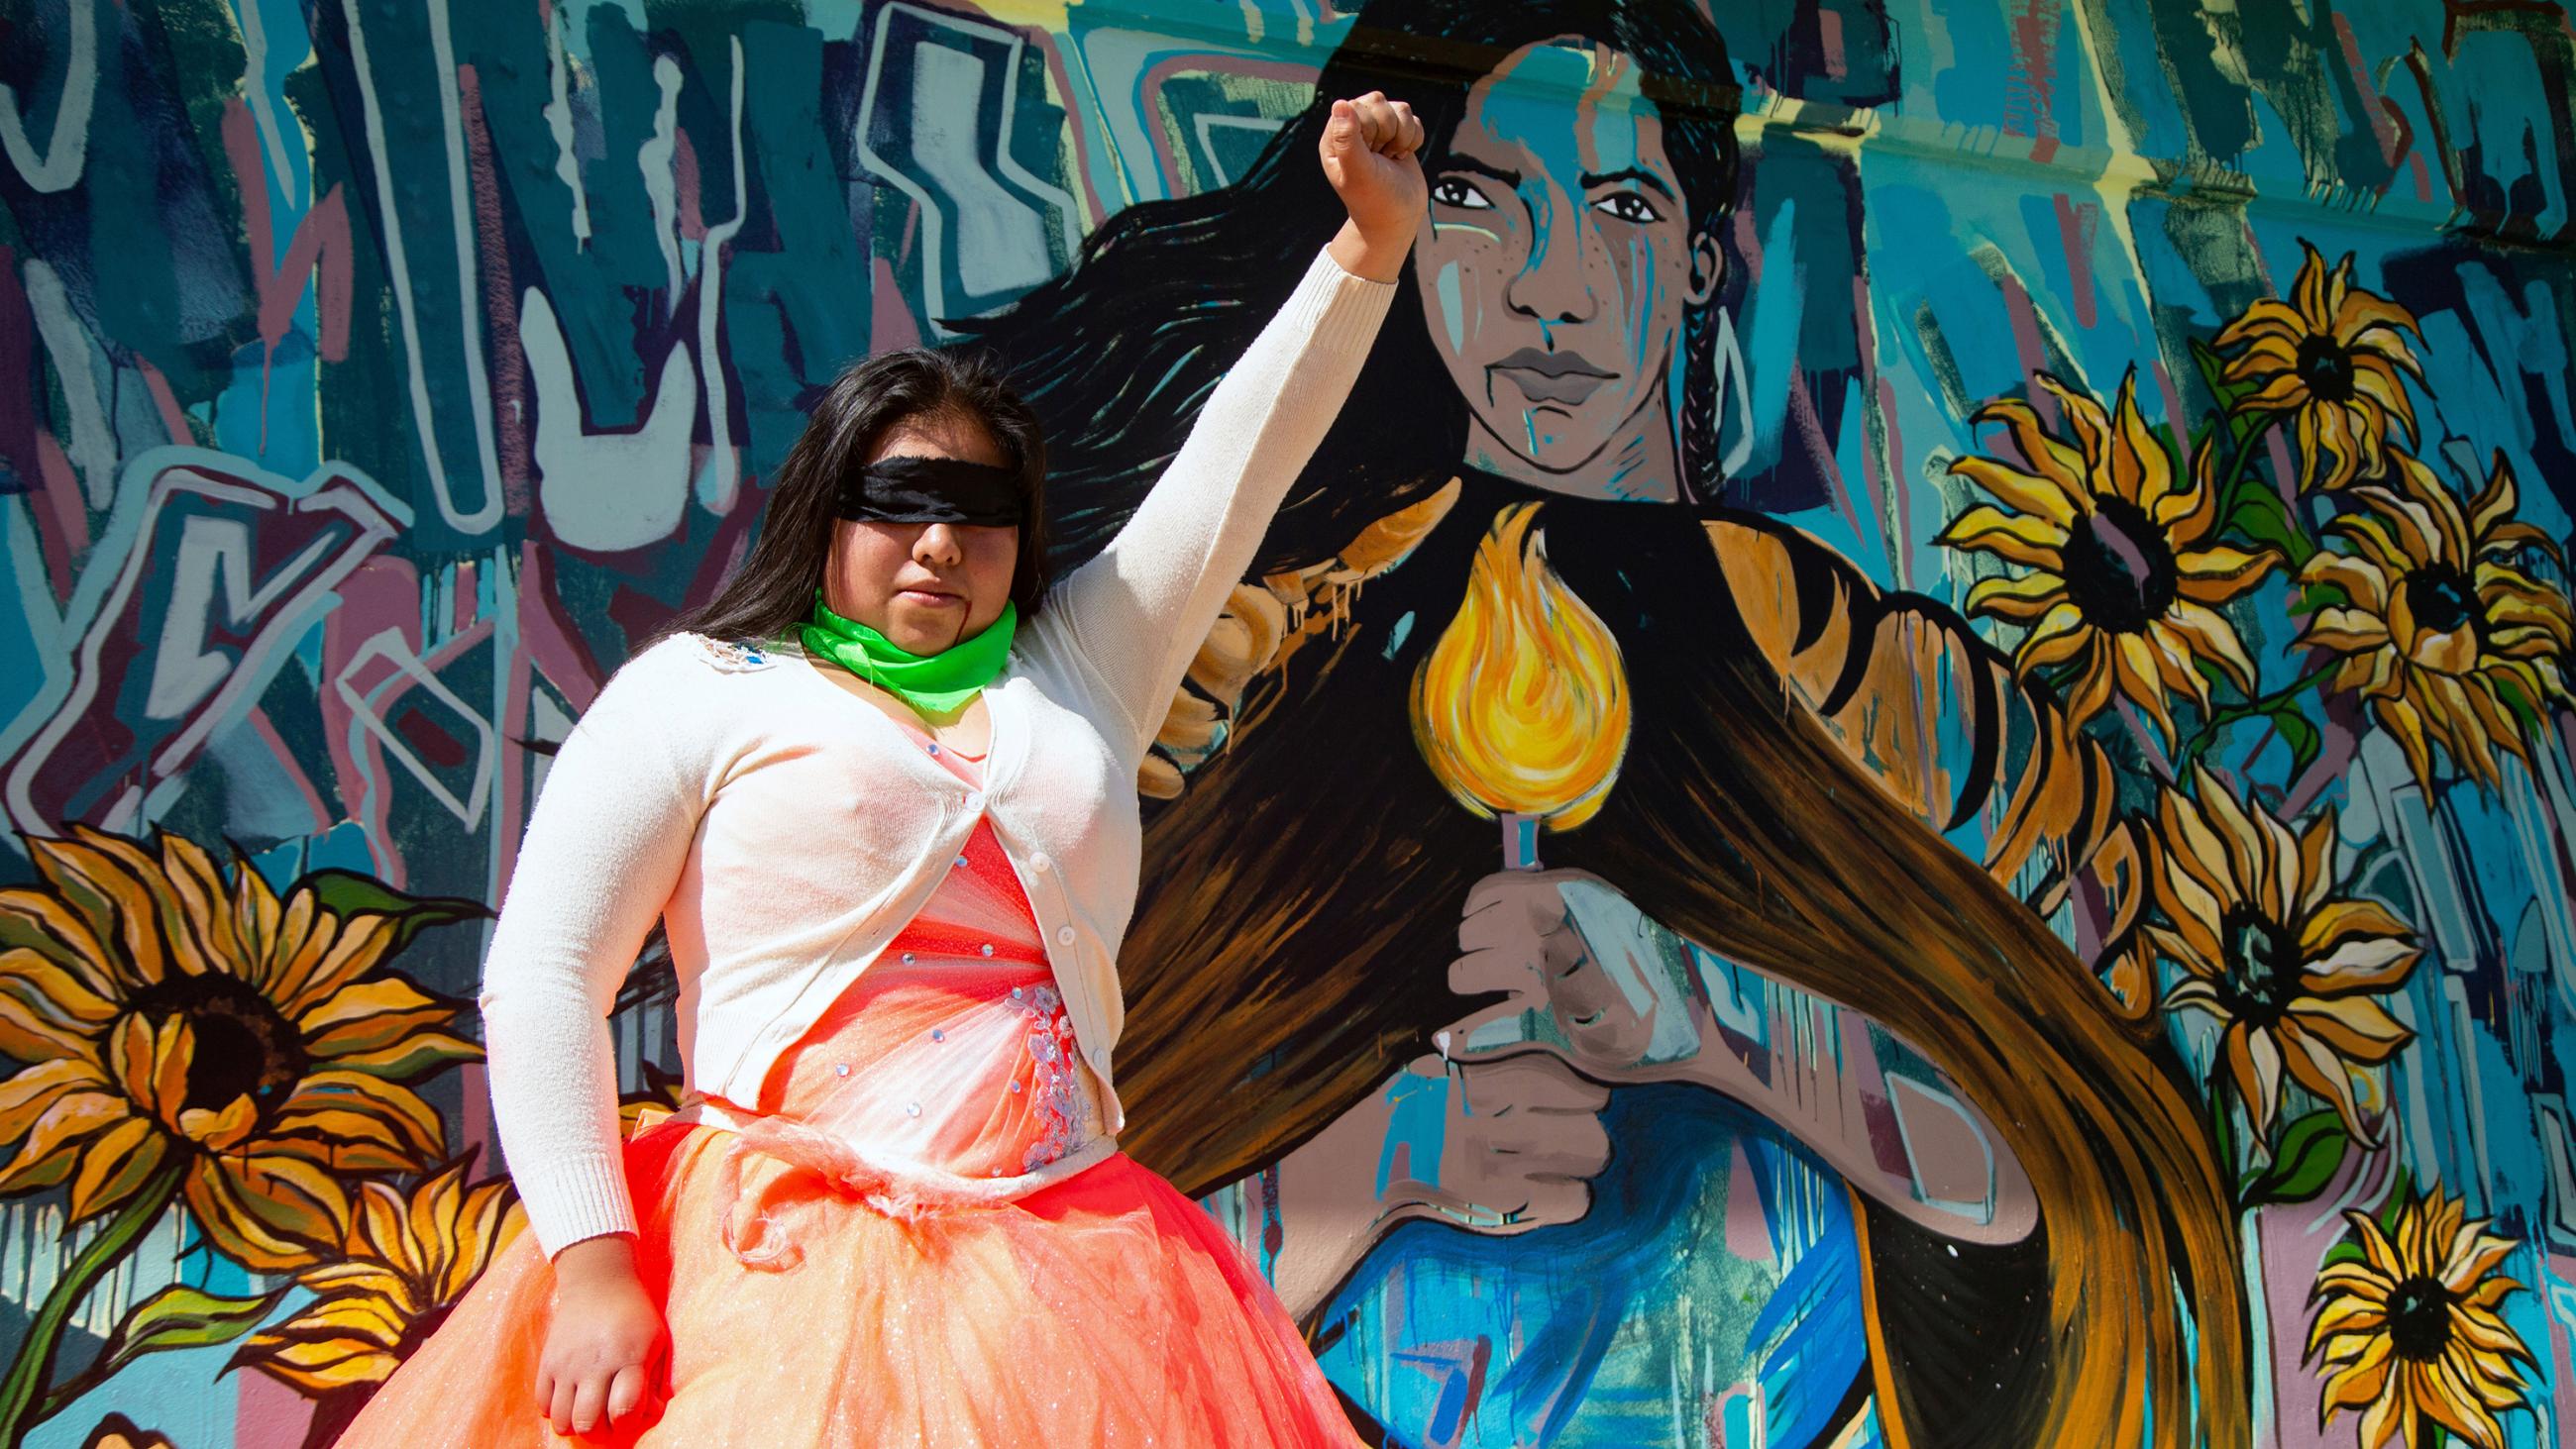 The photo shows a woman in an orange dress and white cardigan with a blindfold over her face holding her fist in the air while she stands in front of a painted mural of a woman holding a candle. 